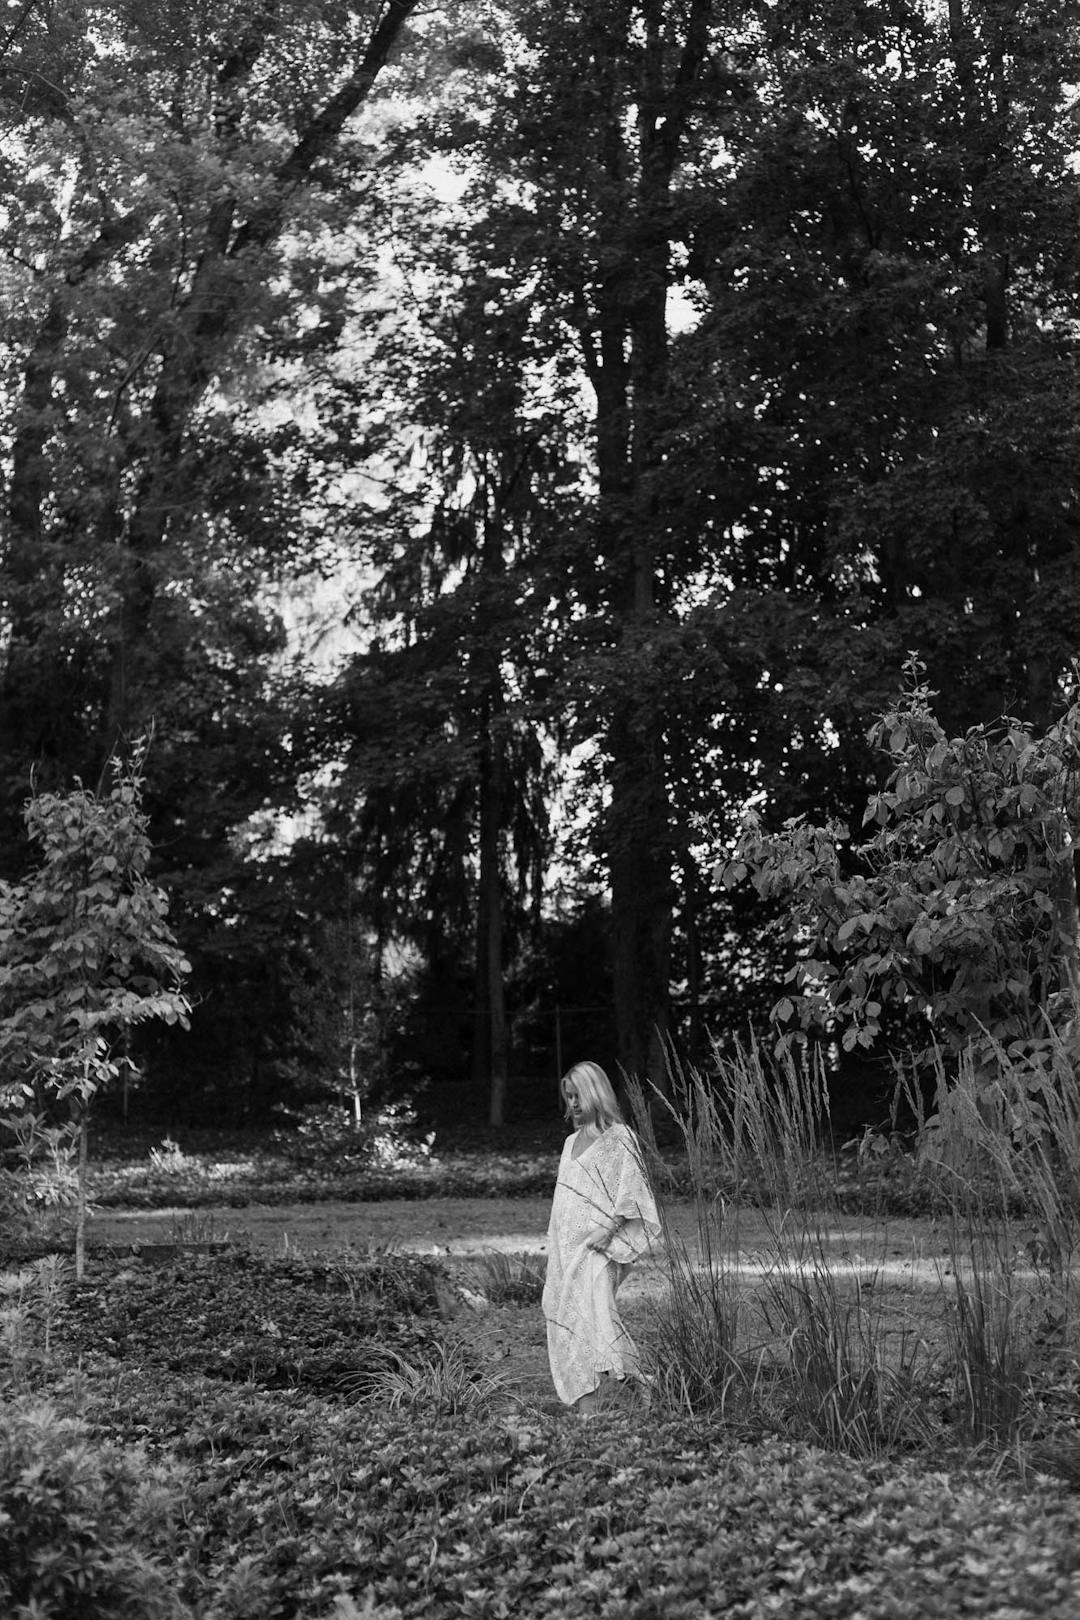 black and white medium format maternity portrait of woman in white dress walking in nature from a distance